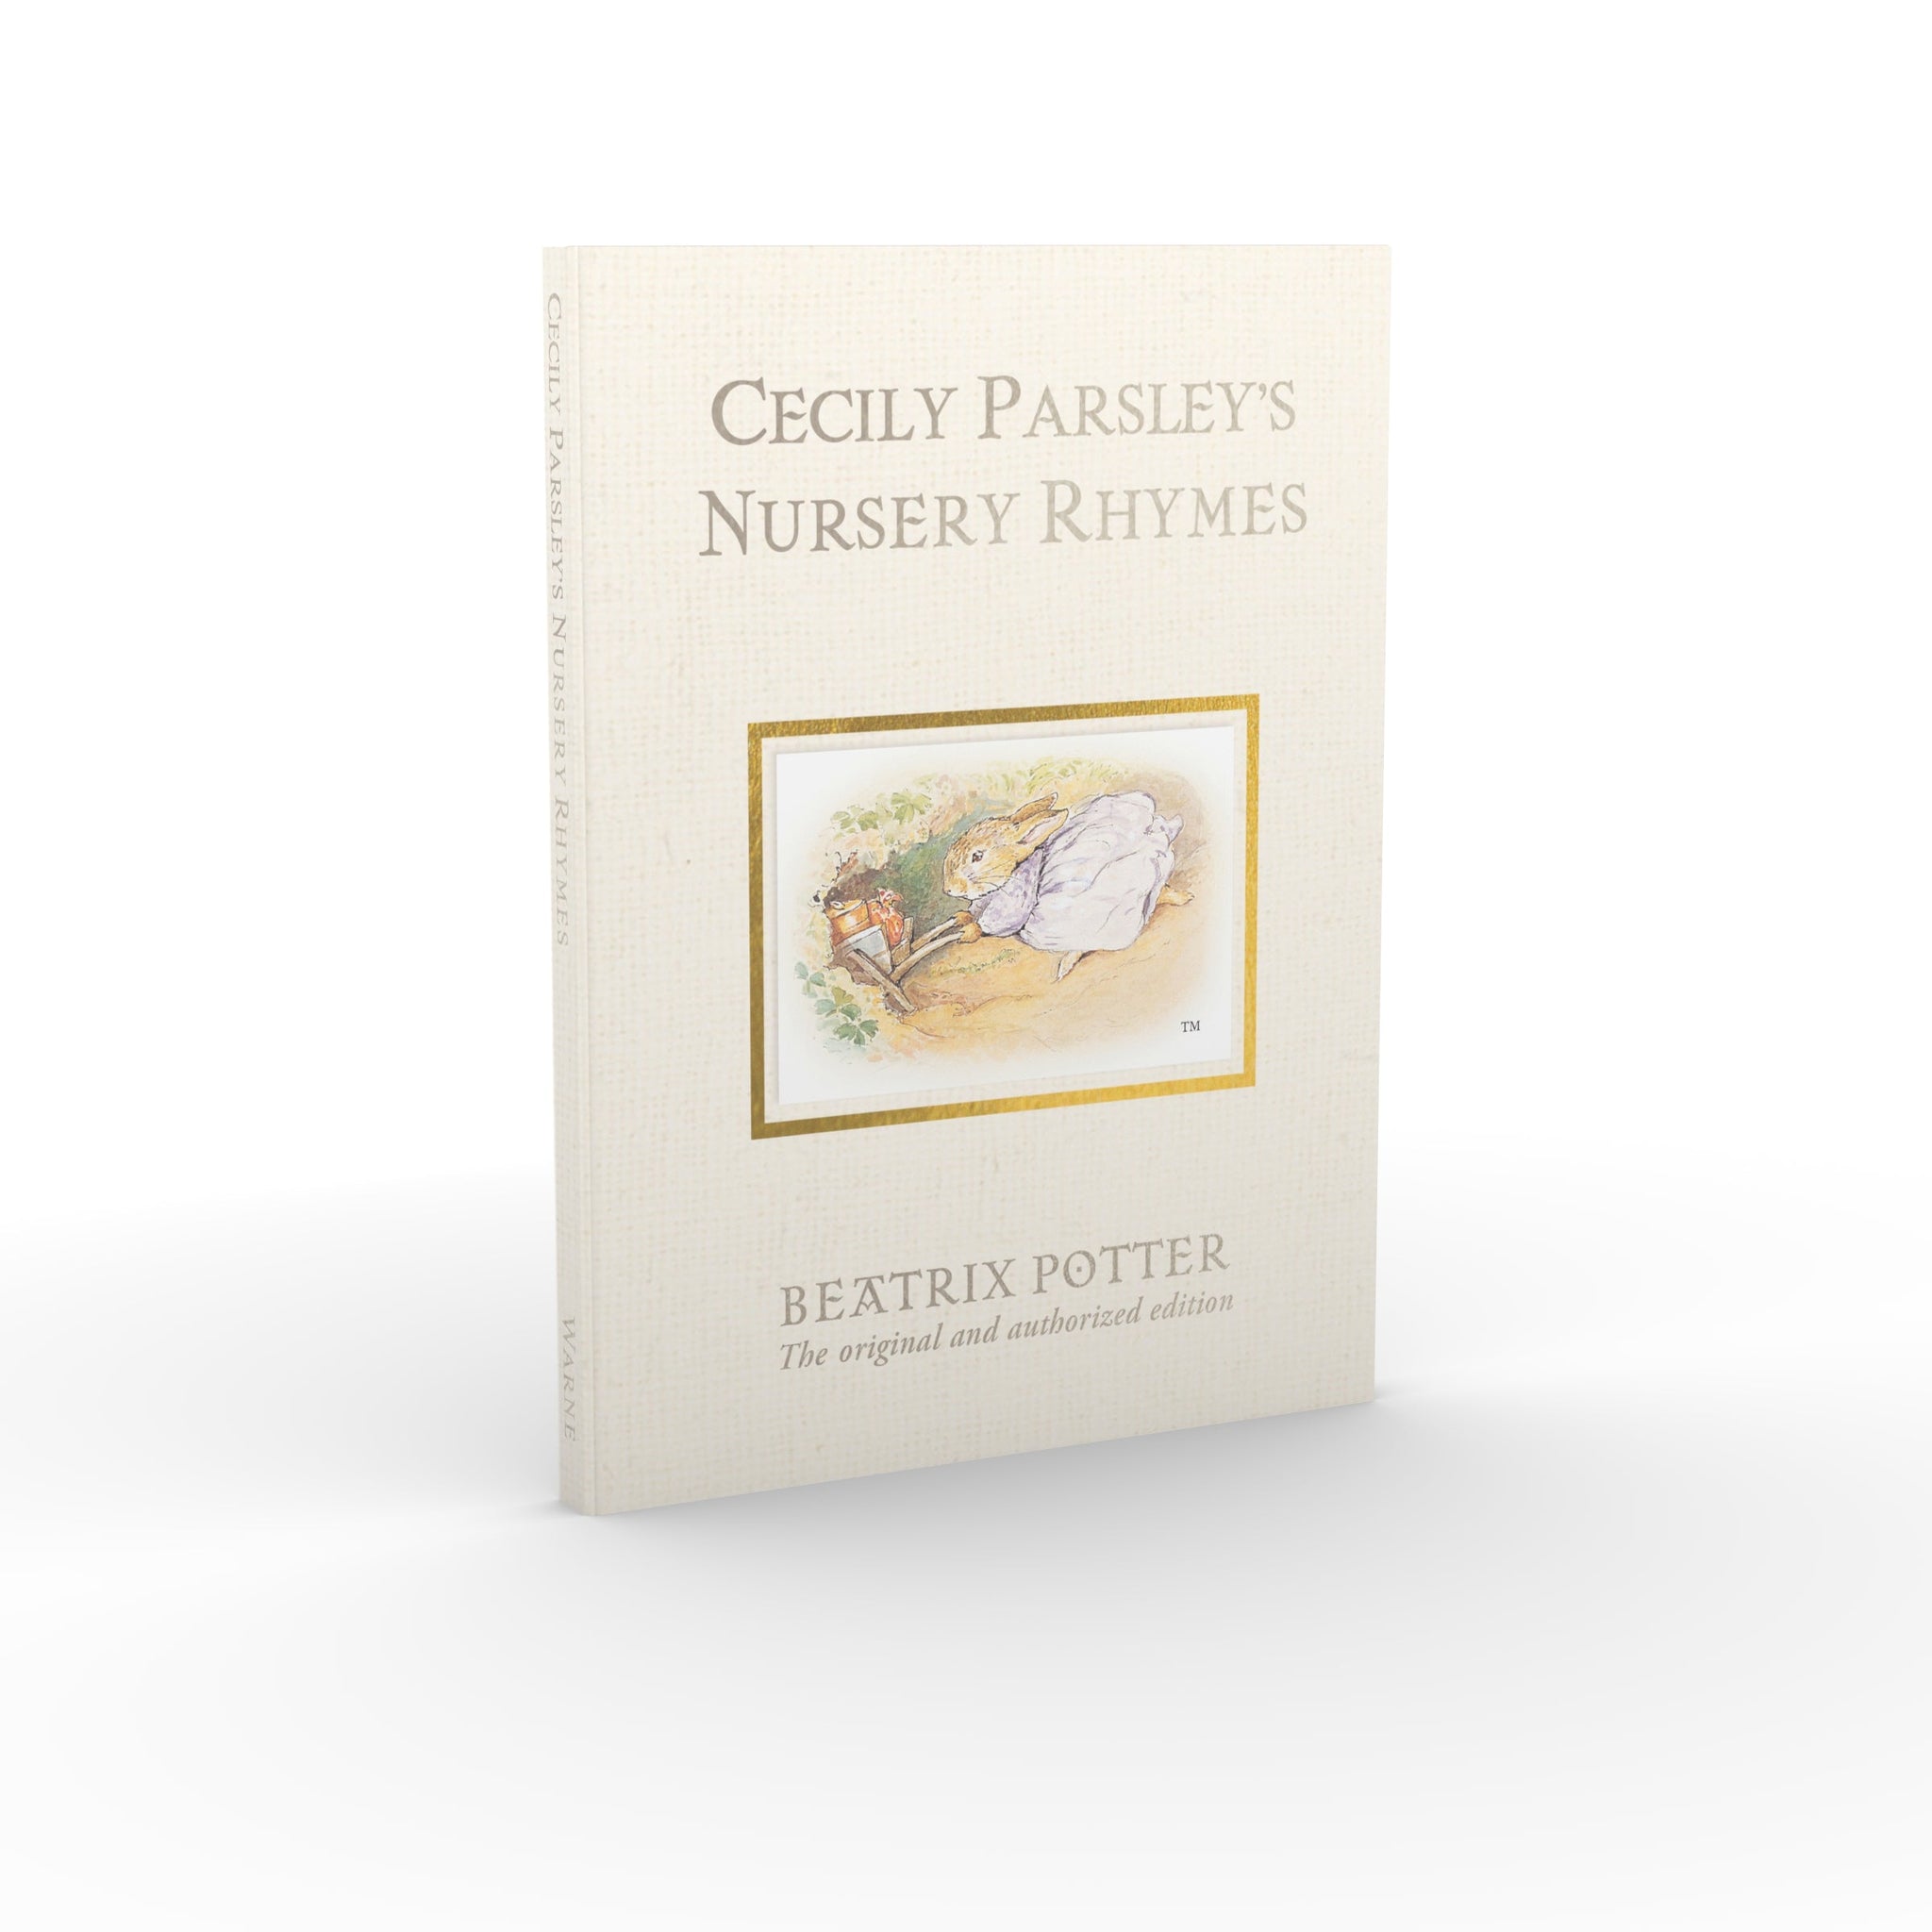 Cecily Parsley's Nursery Rhymes - Centenary Limited Edition Box